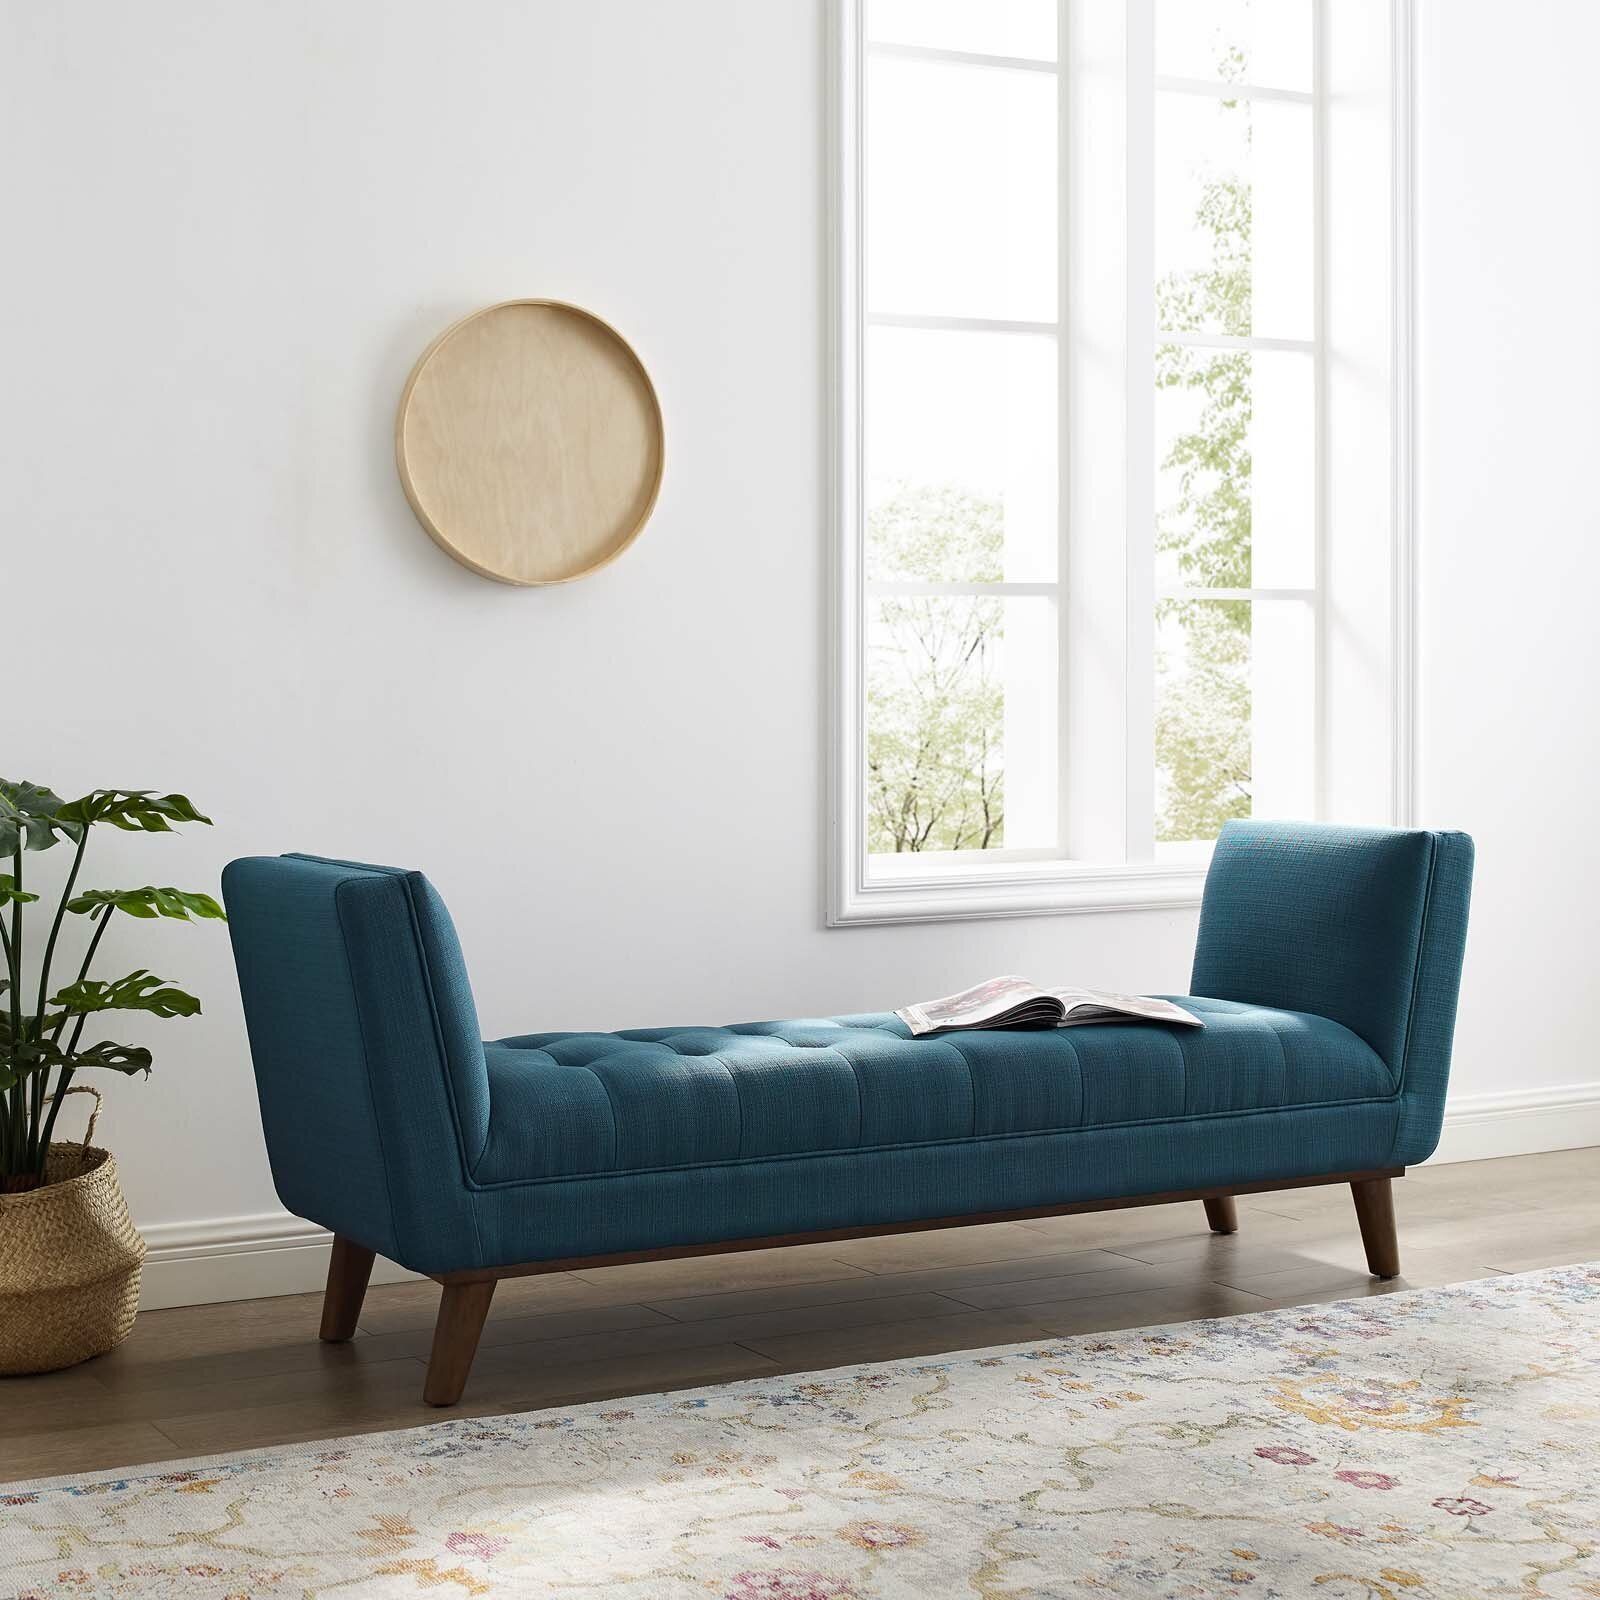 Tufted Upholstered Bench With Arms